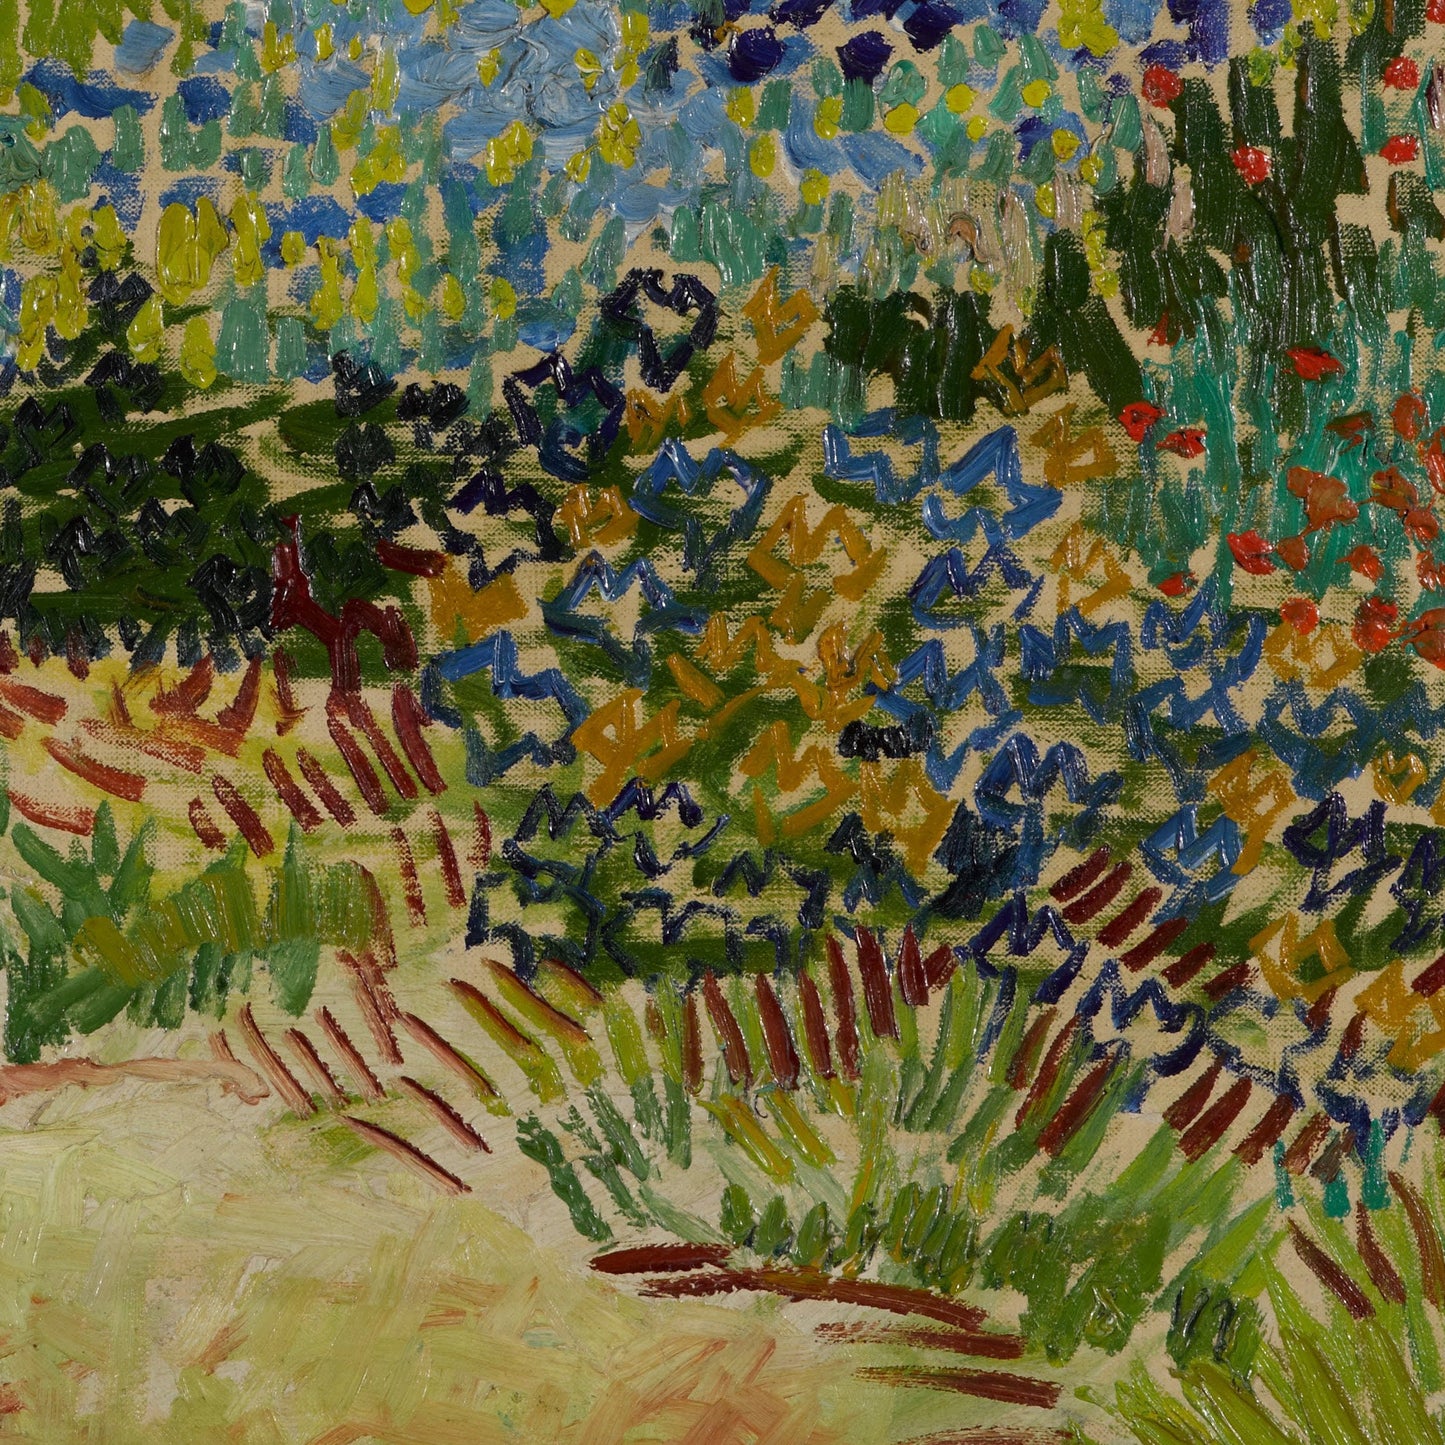 Garden at Arles by Vincent Van Gogh, 3d Printed with texture and brush strokes looks like original oil-painting, code:059